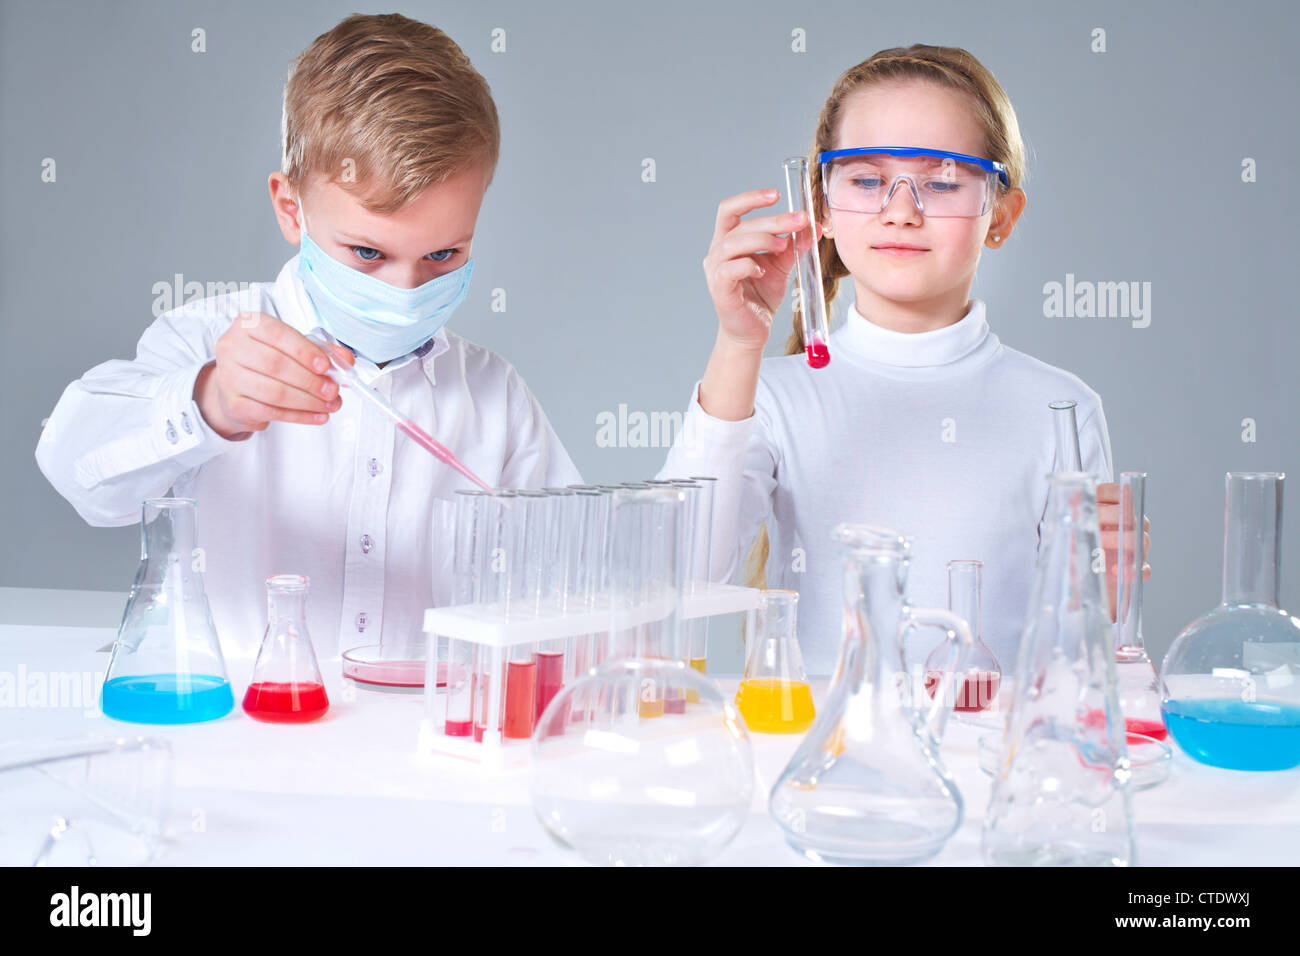 Team of young prodigies conducting scientific experiments Stock Photo